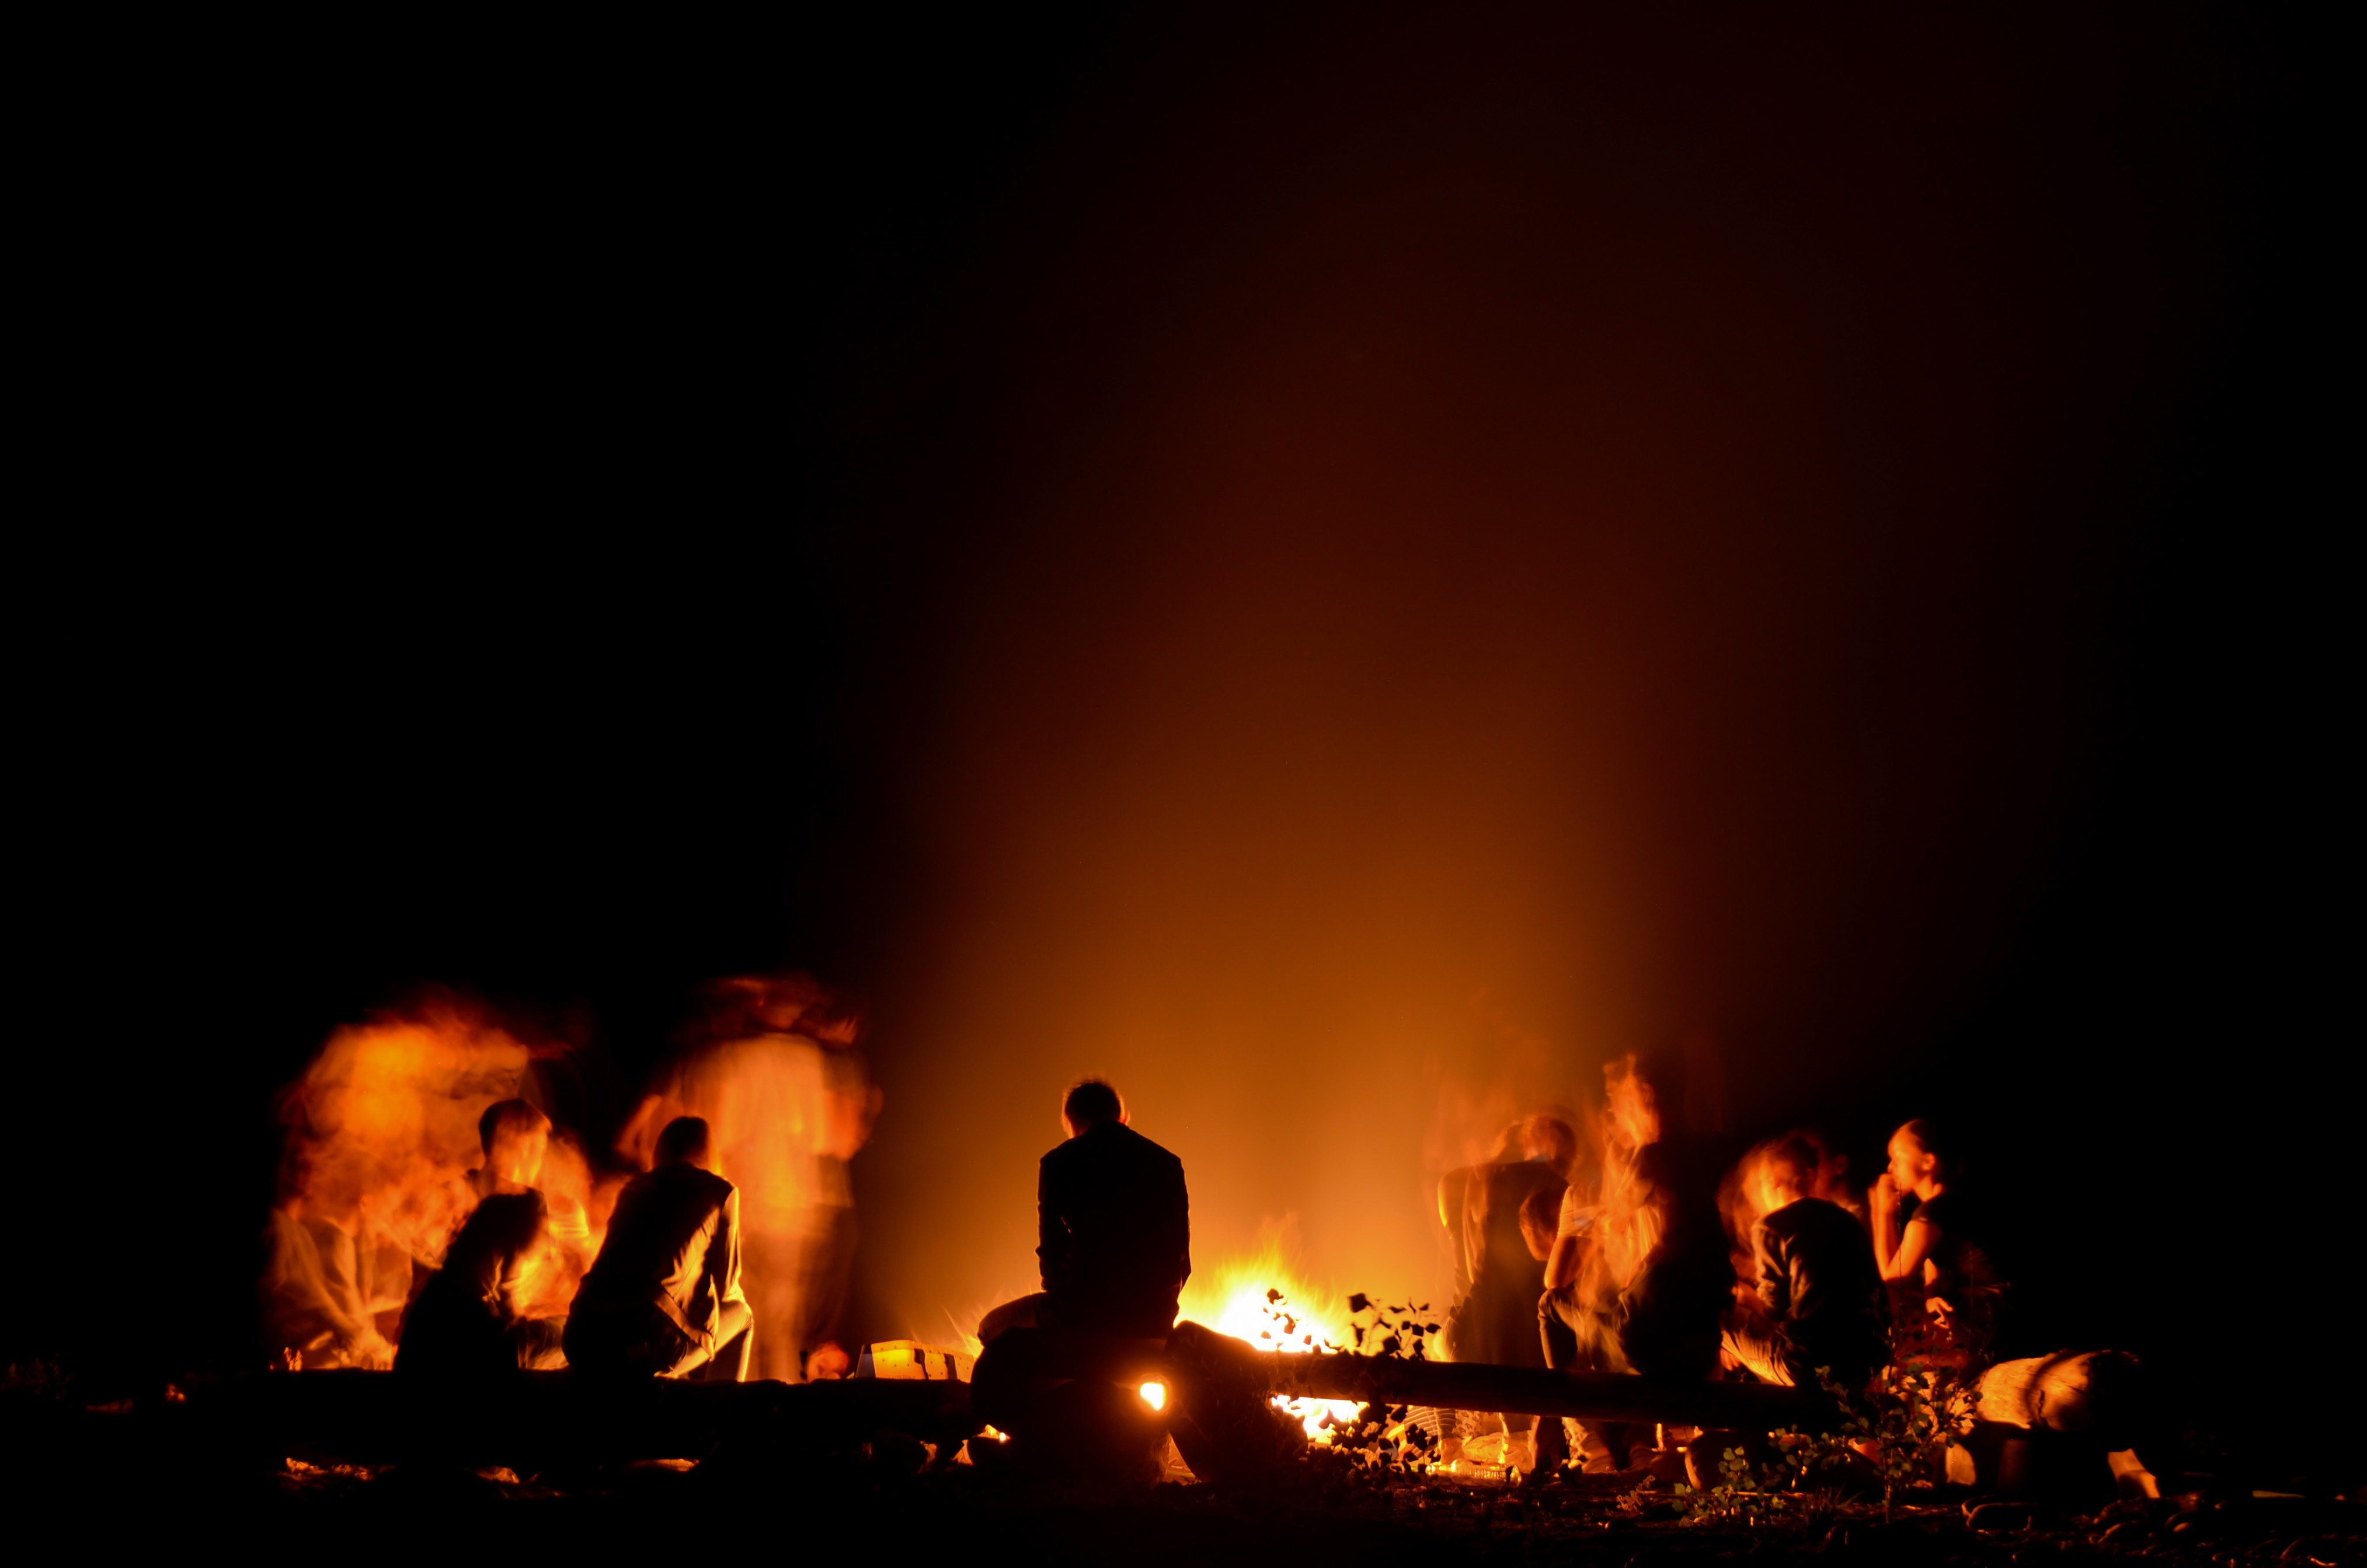 People sitting around a campfire are silhouetted against the night.